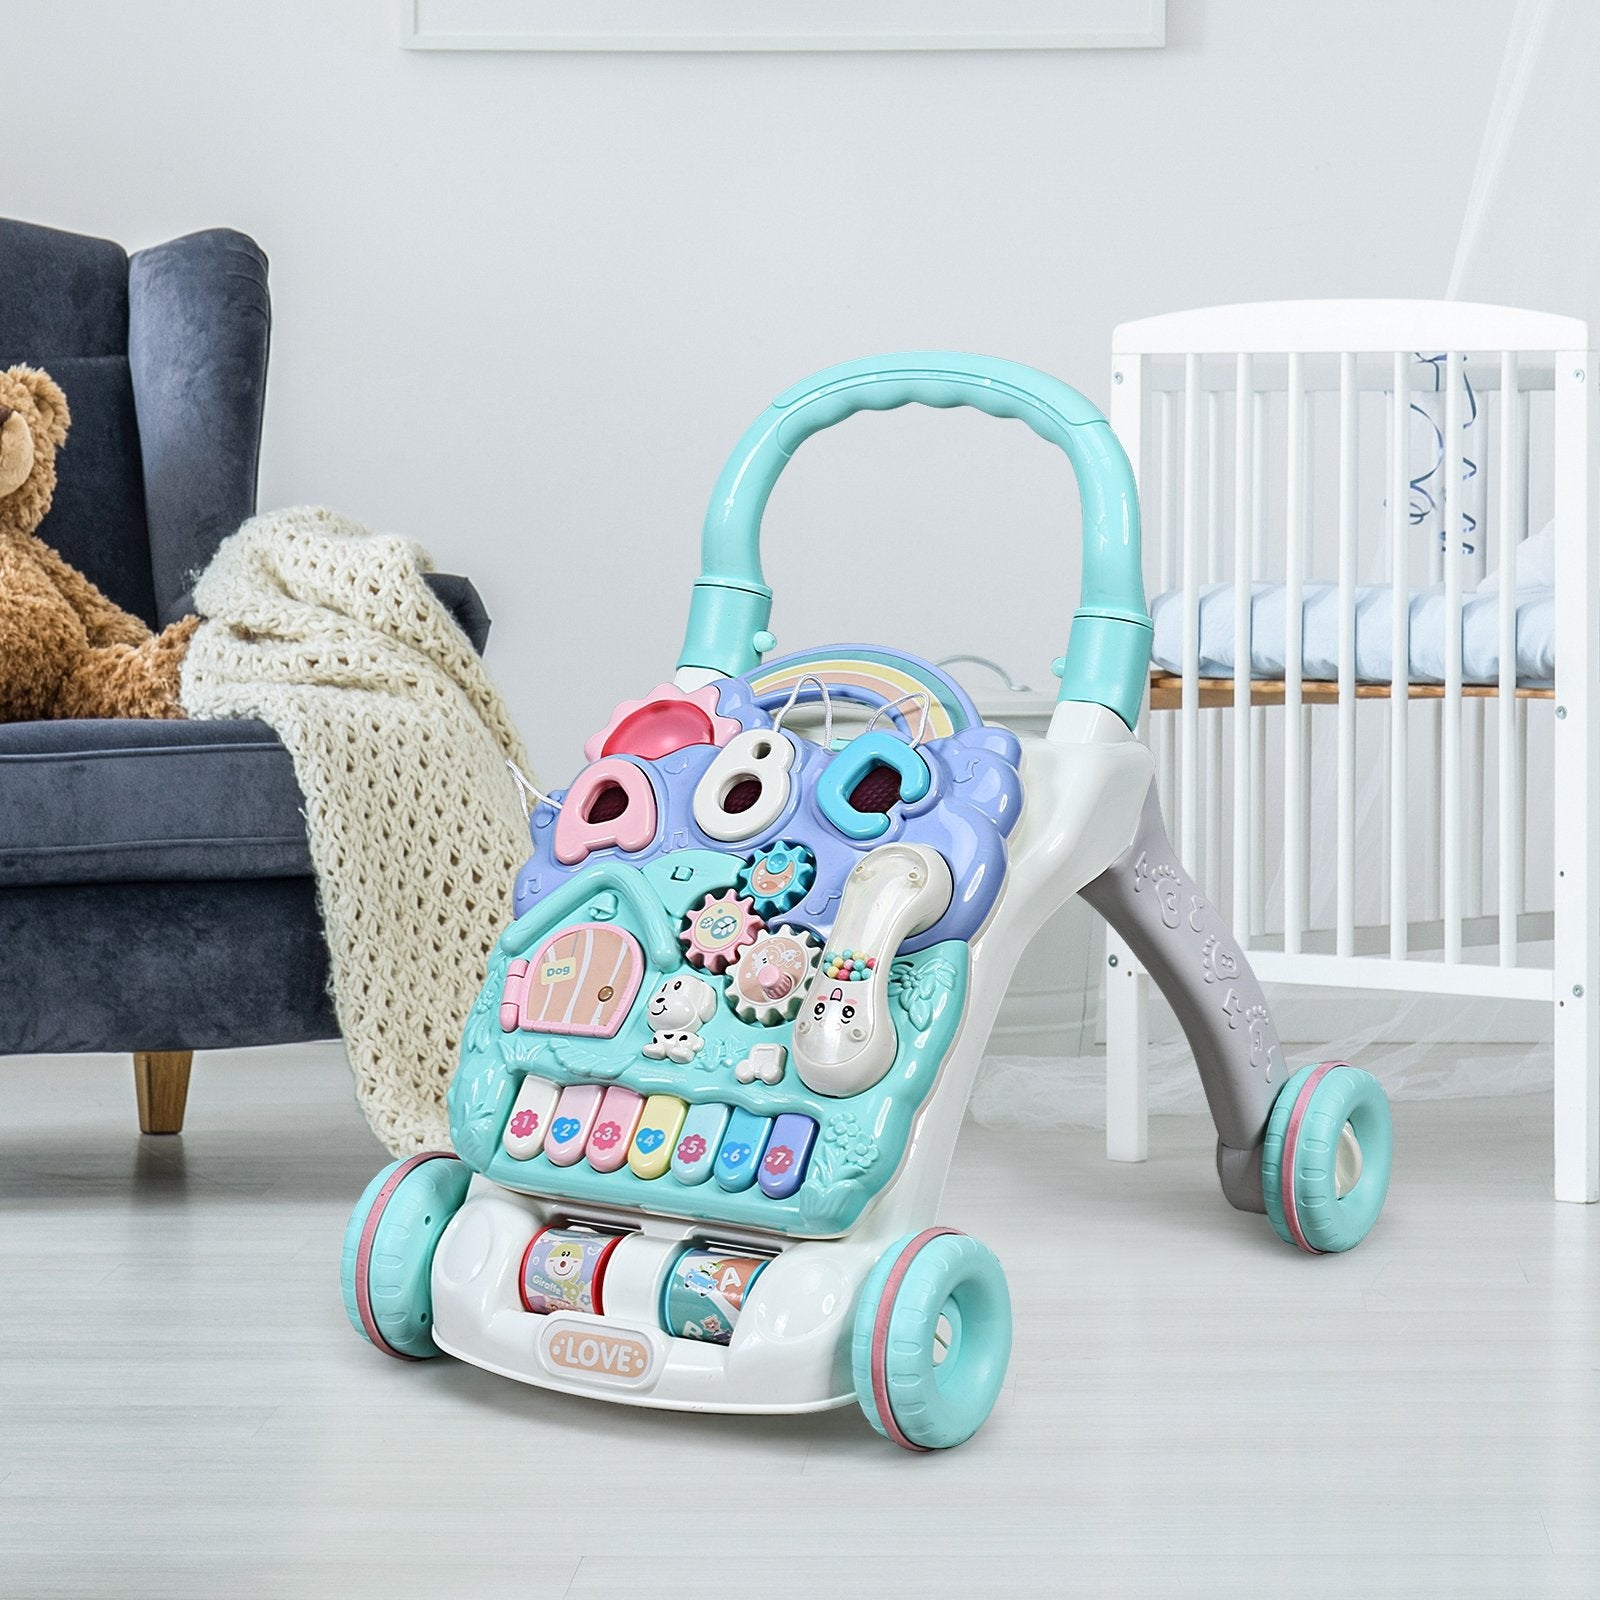 Baby Sit-to-Stand Learning Walker Toddler Musical Toy, Blue at Gallery Canada